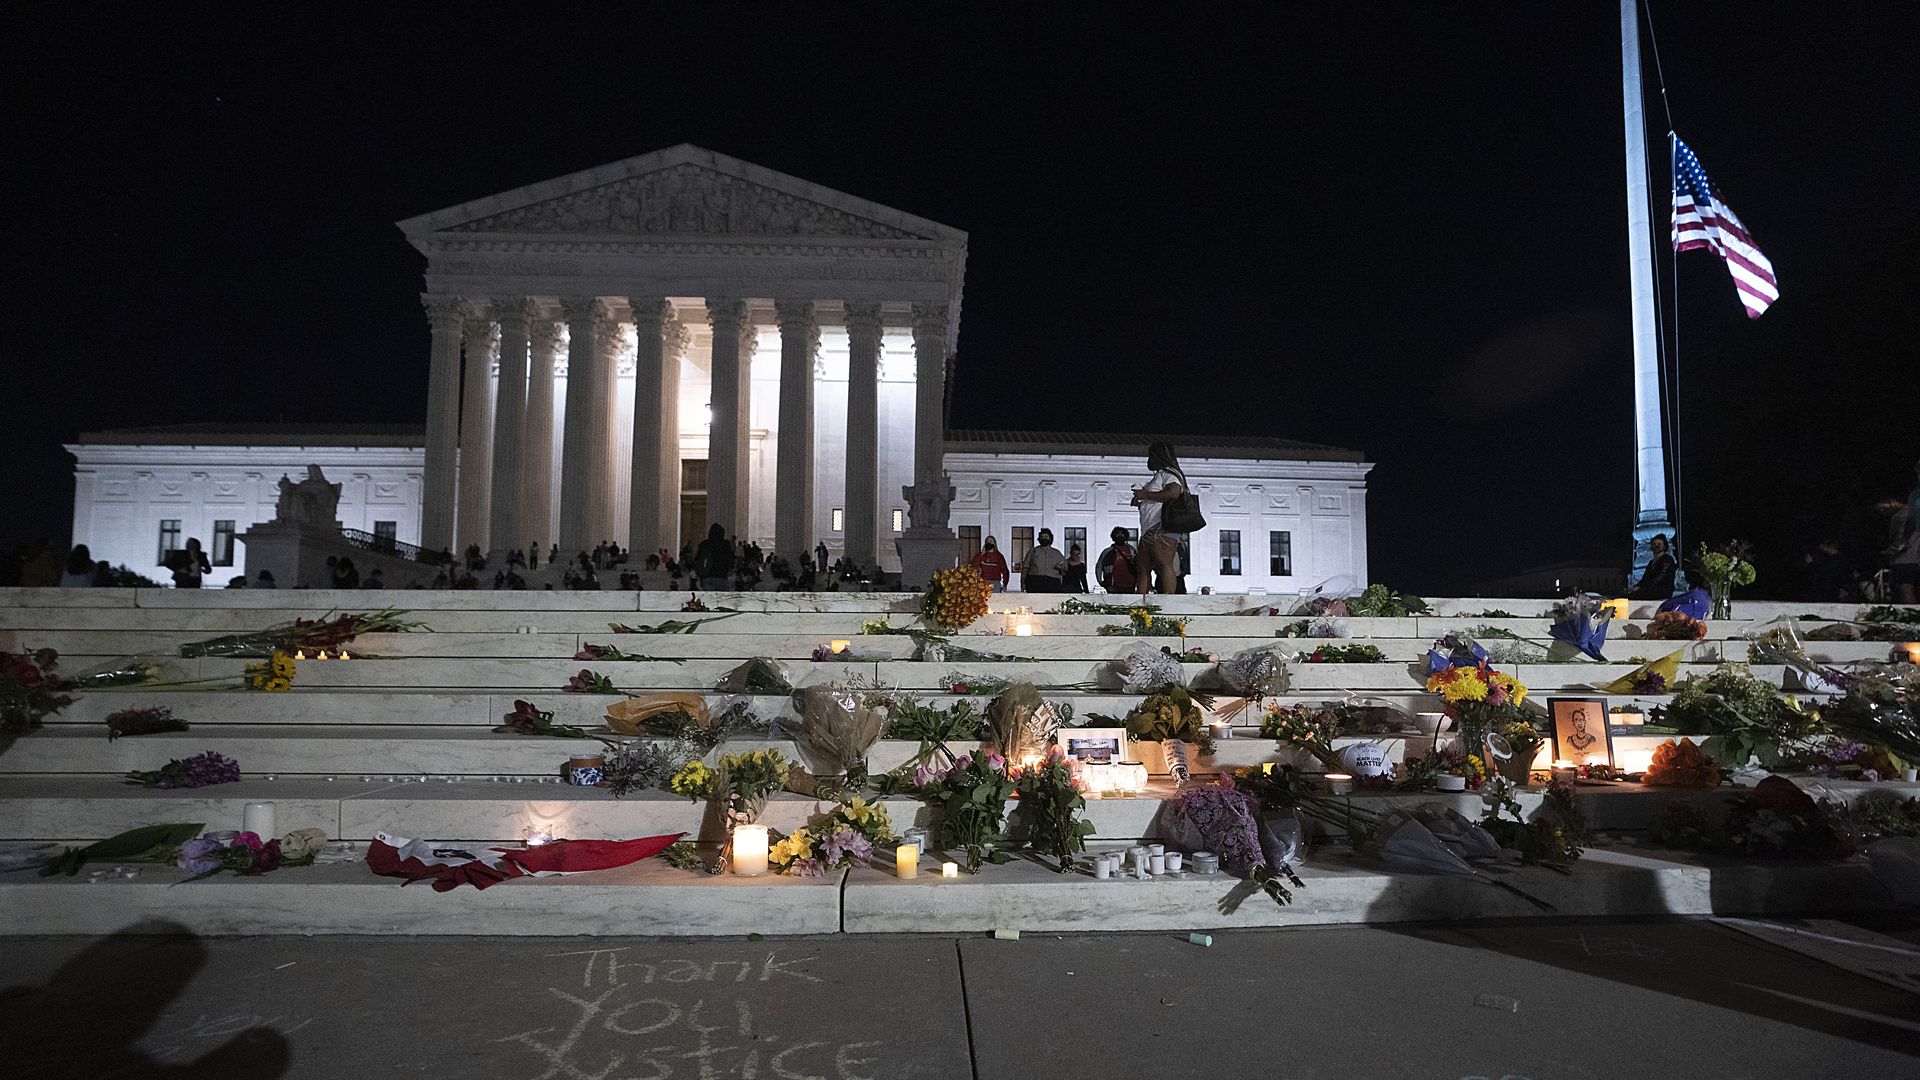 The flag flies at half-staff as people mourn on the Supreme Court steps last night.